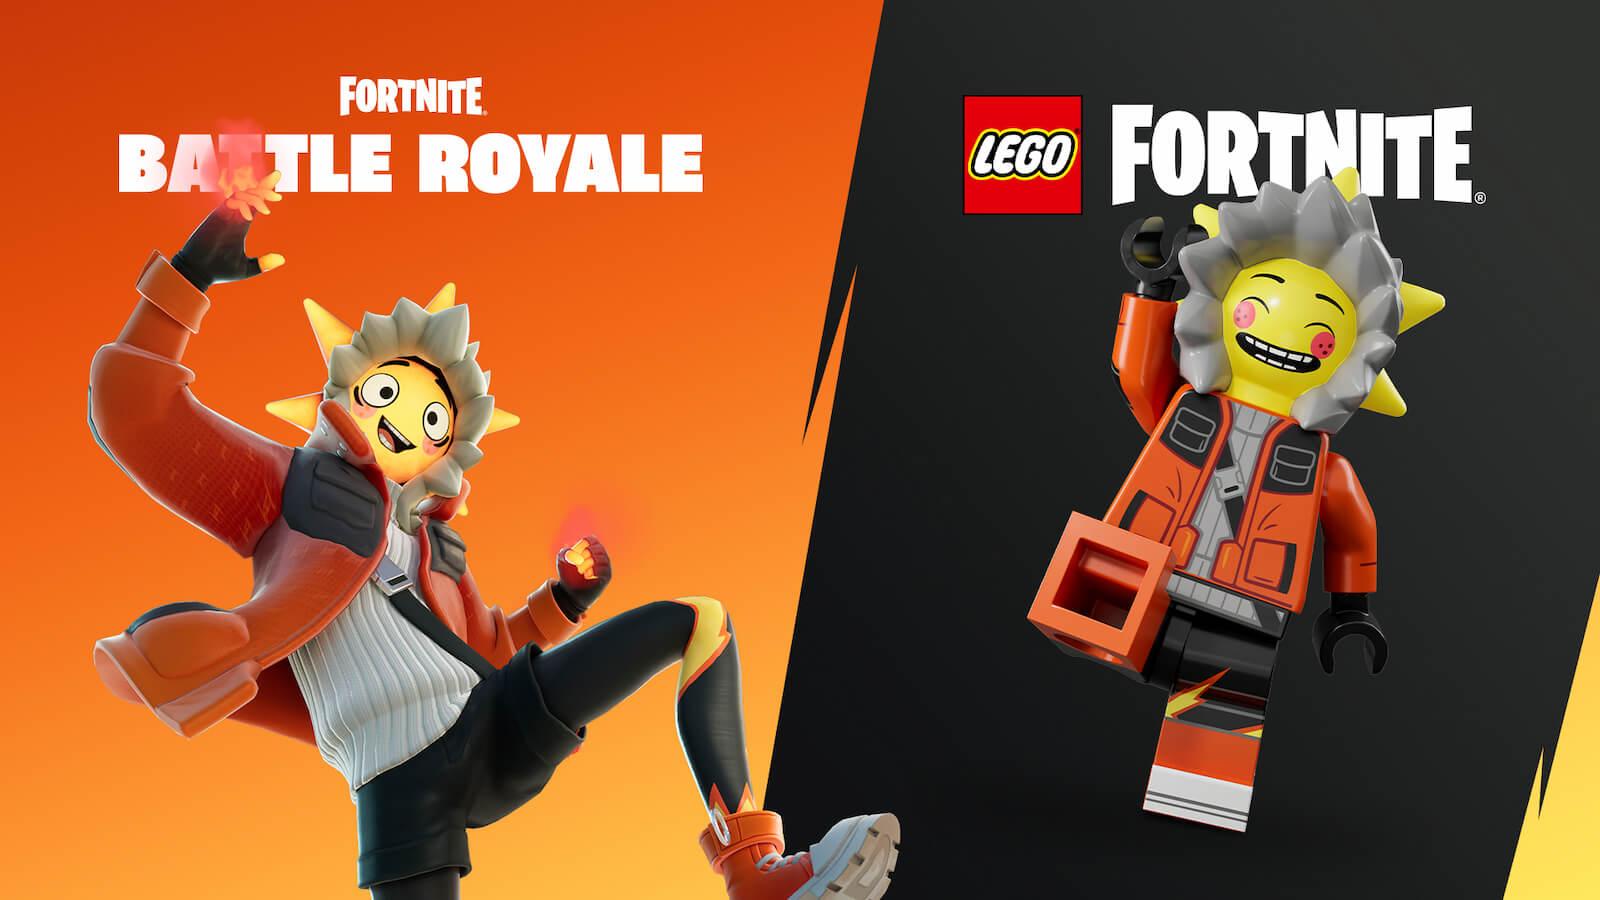 Fortnite player claims LEGO collab “killed” the Item Shop - Dexerto